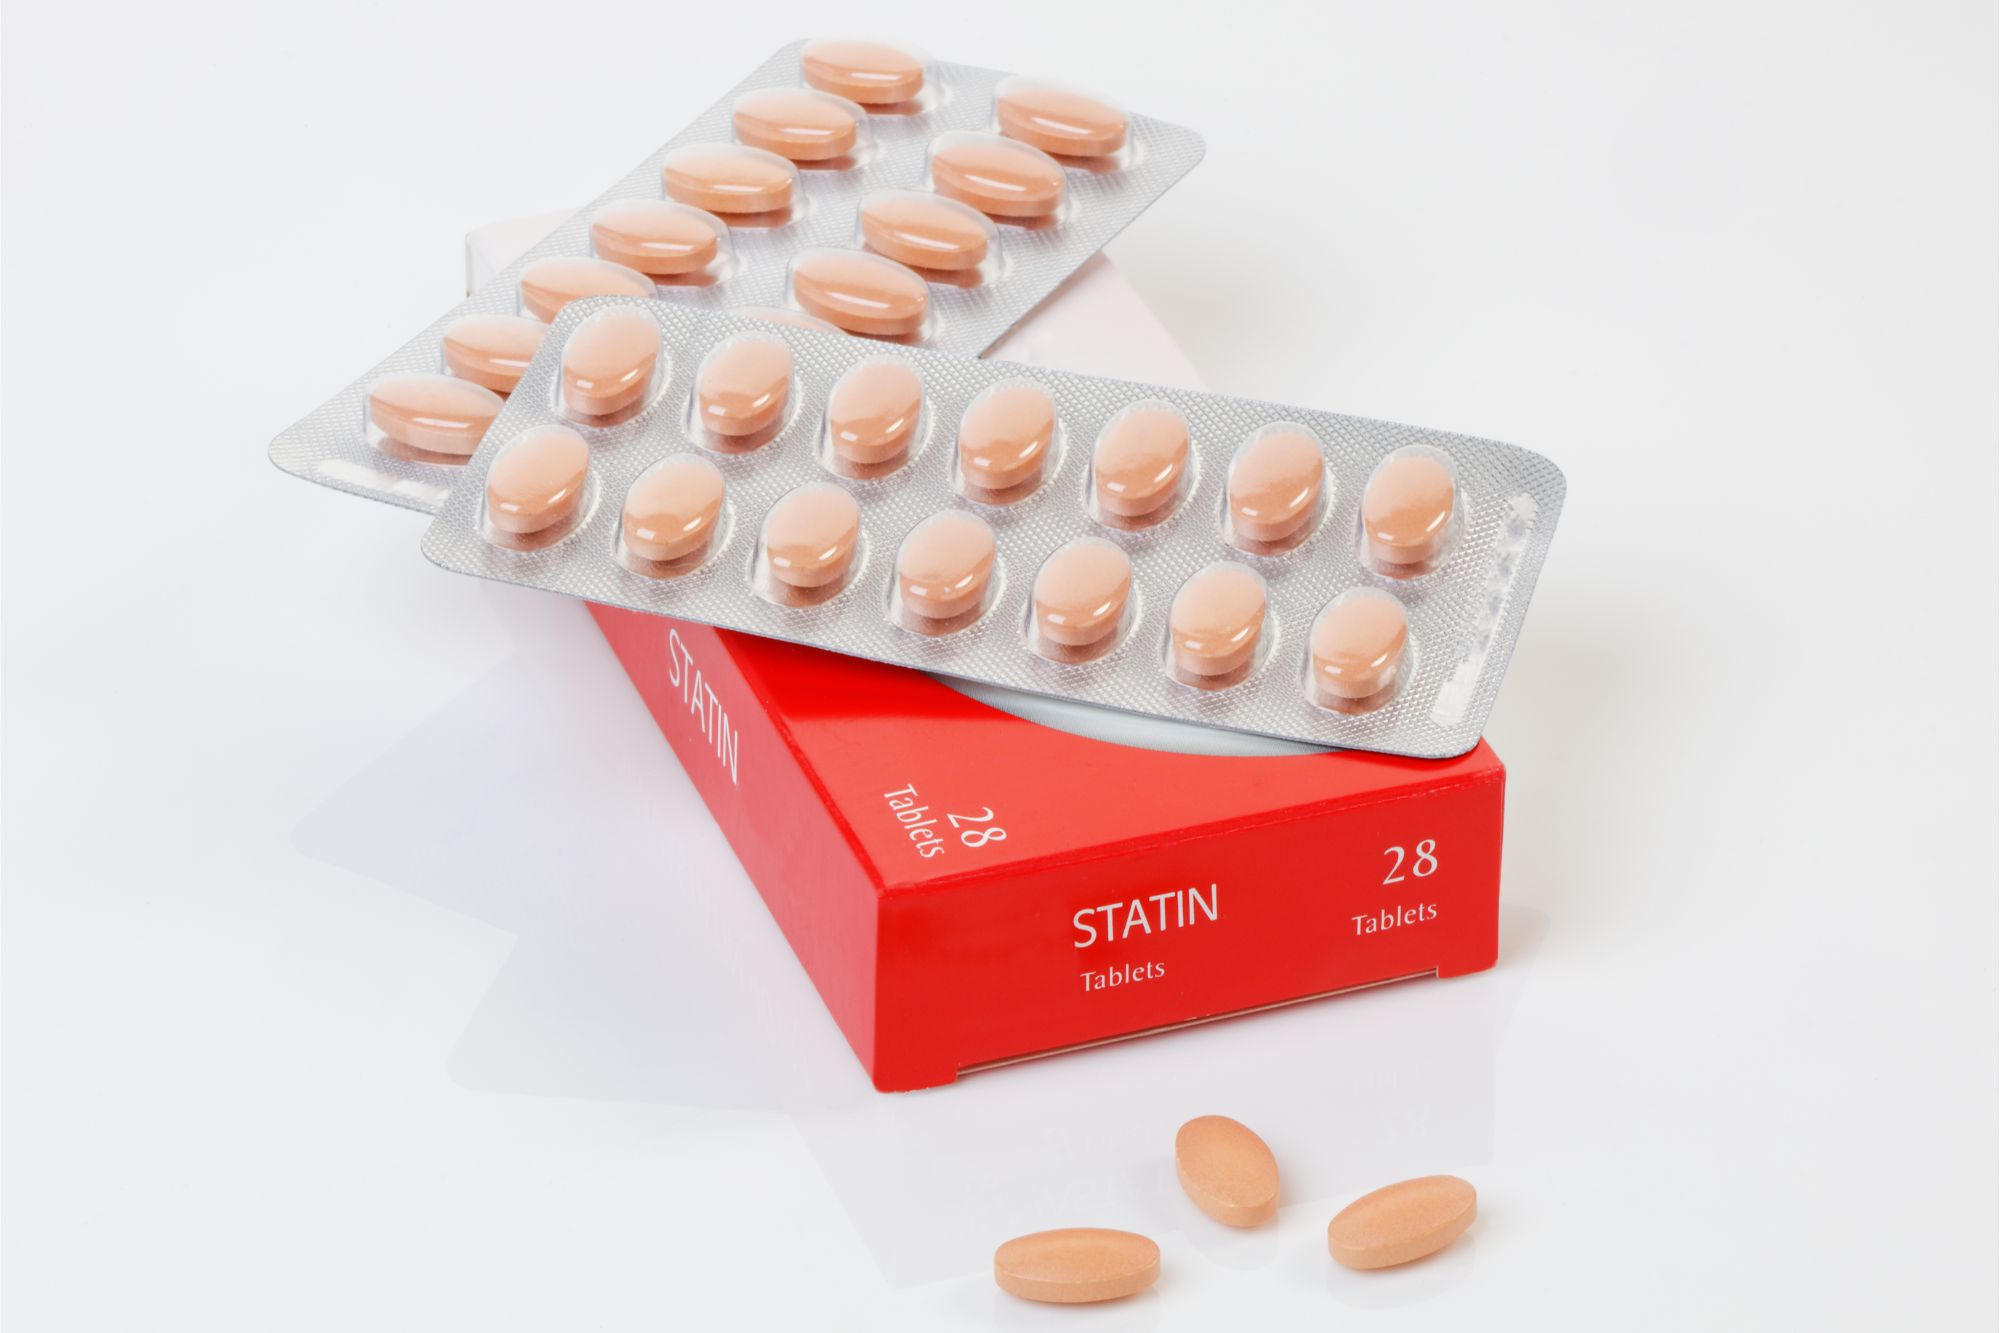 Scientists have found new doable advantages of statins past decreasing ldl cholesterol